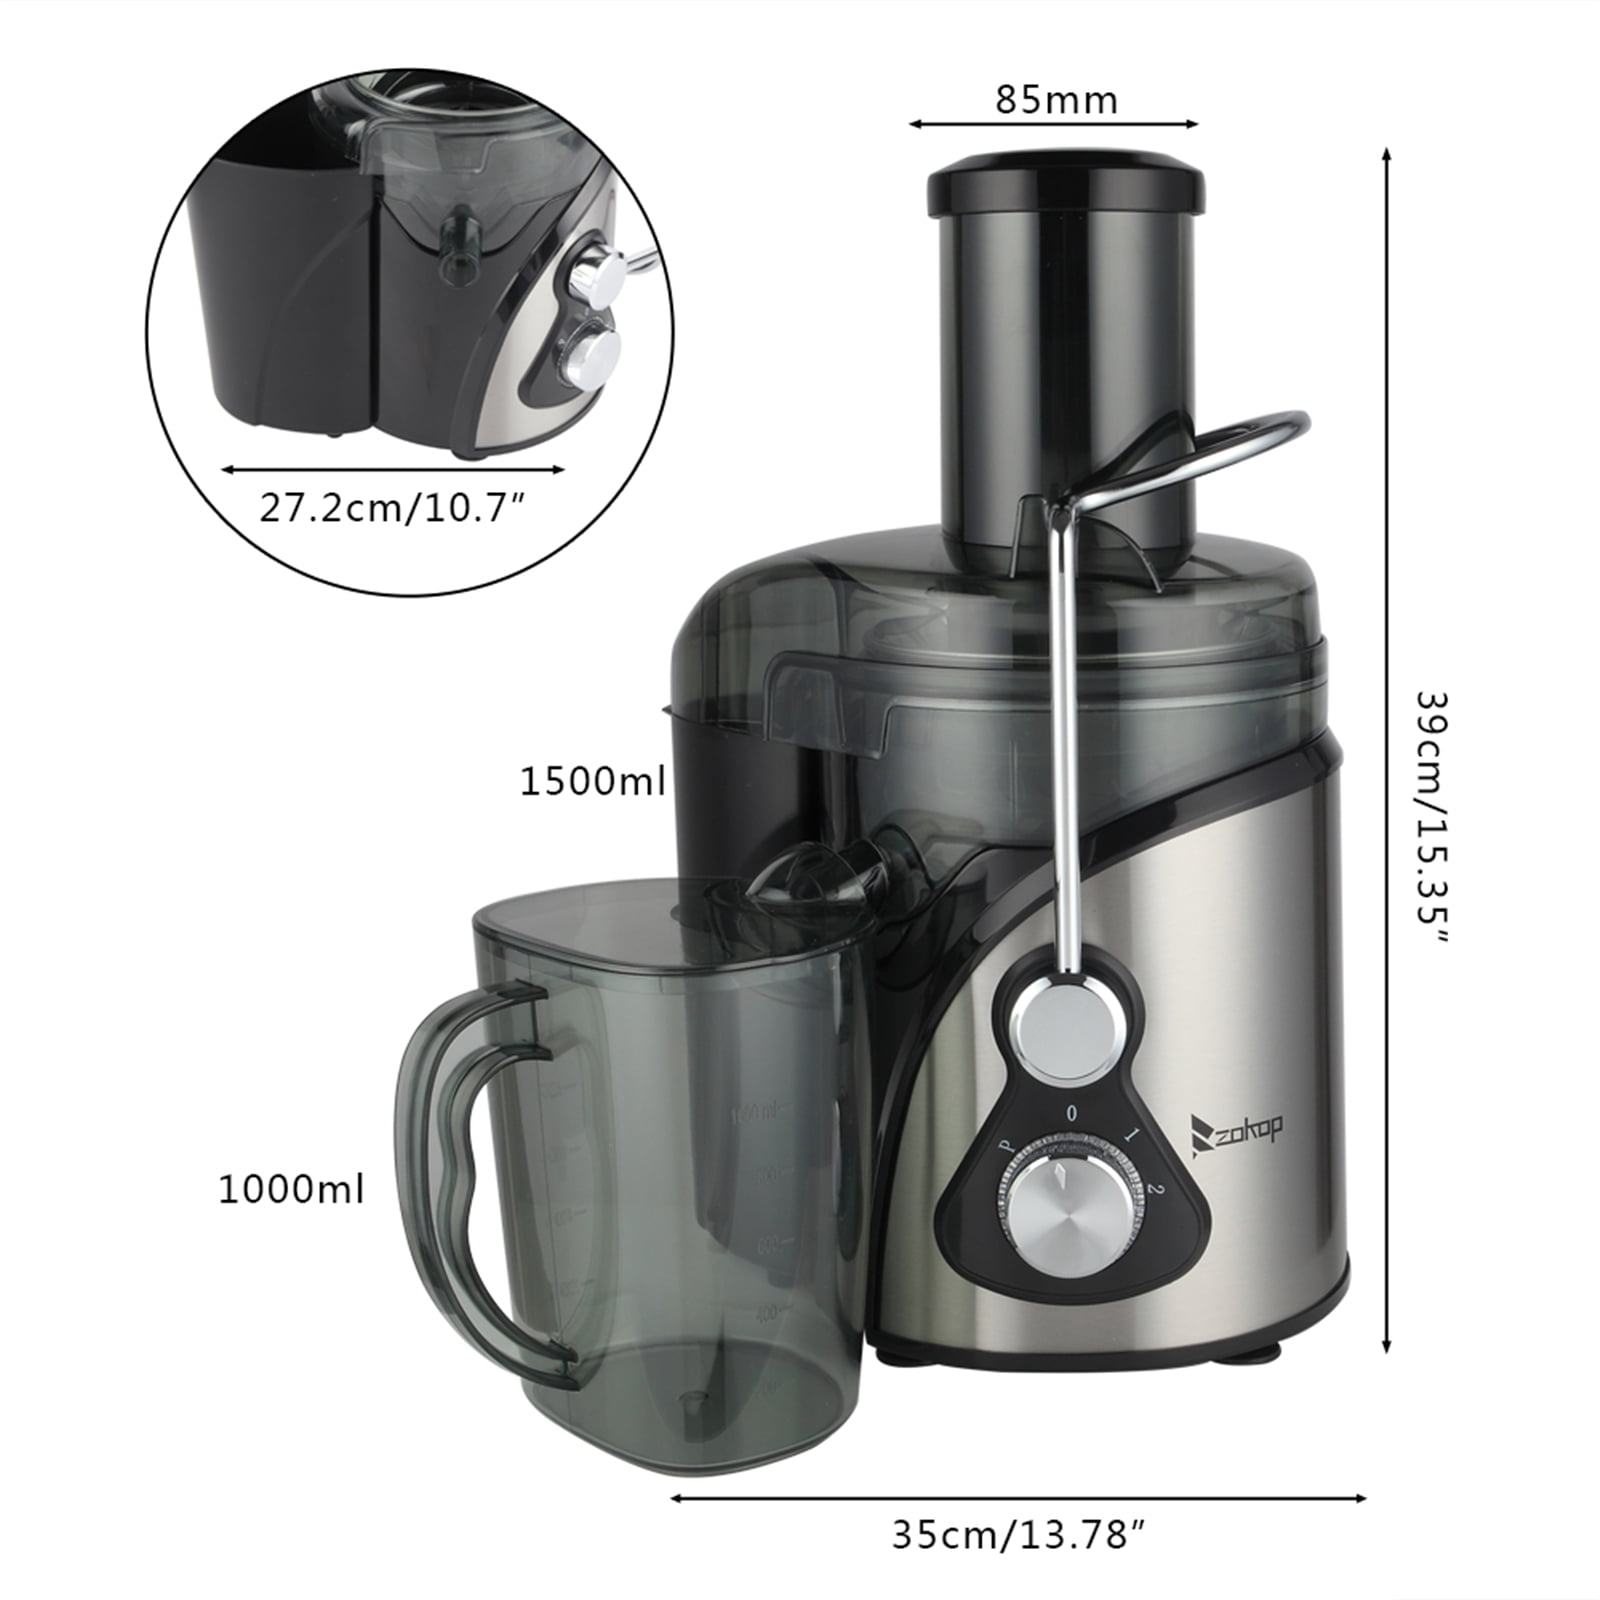 Juice Extractor, Juicer Machines Vegetable and Fruit, Electric Orange Juicer  Centrifugal Juice Maker for Juicing Fruits, Home Small Stainless Steel  Citrus Juicers Easy to Clean, Black, J905 